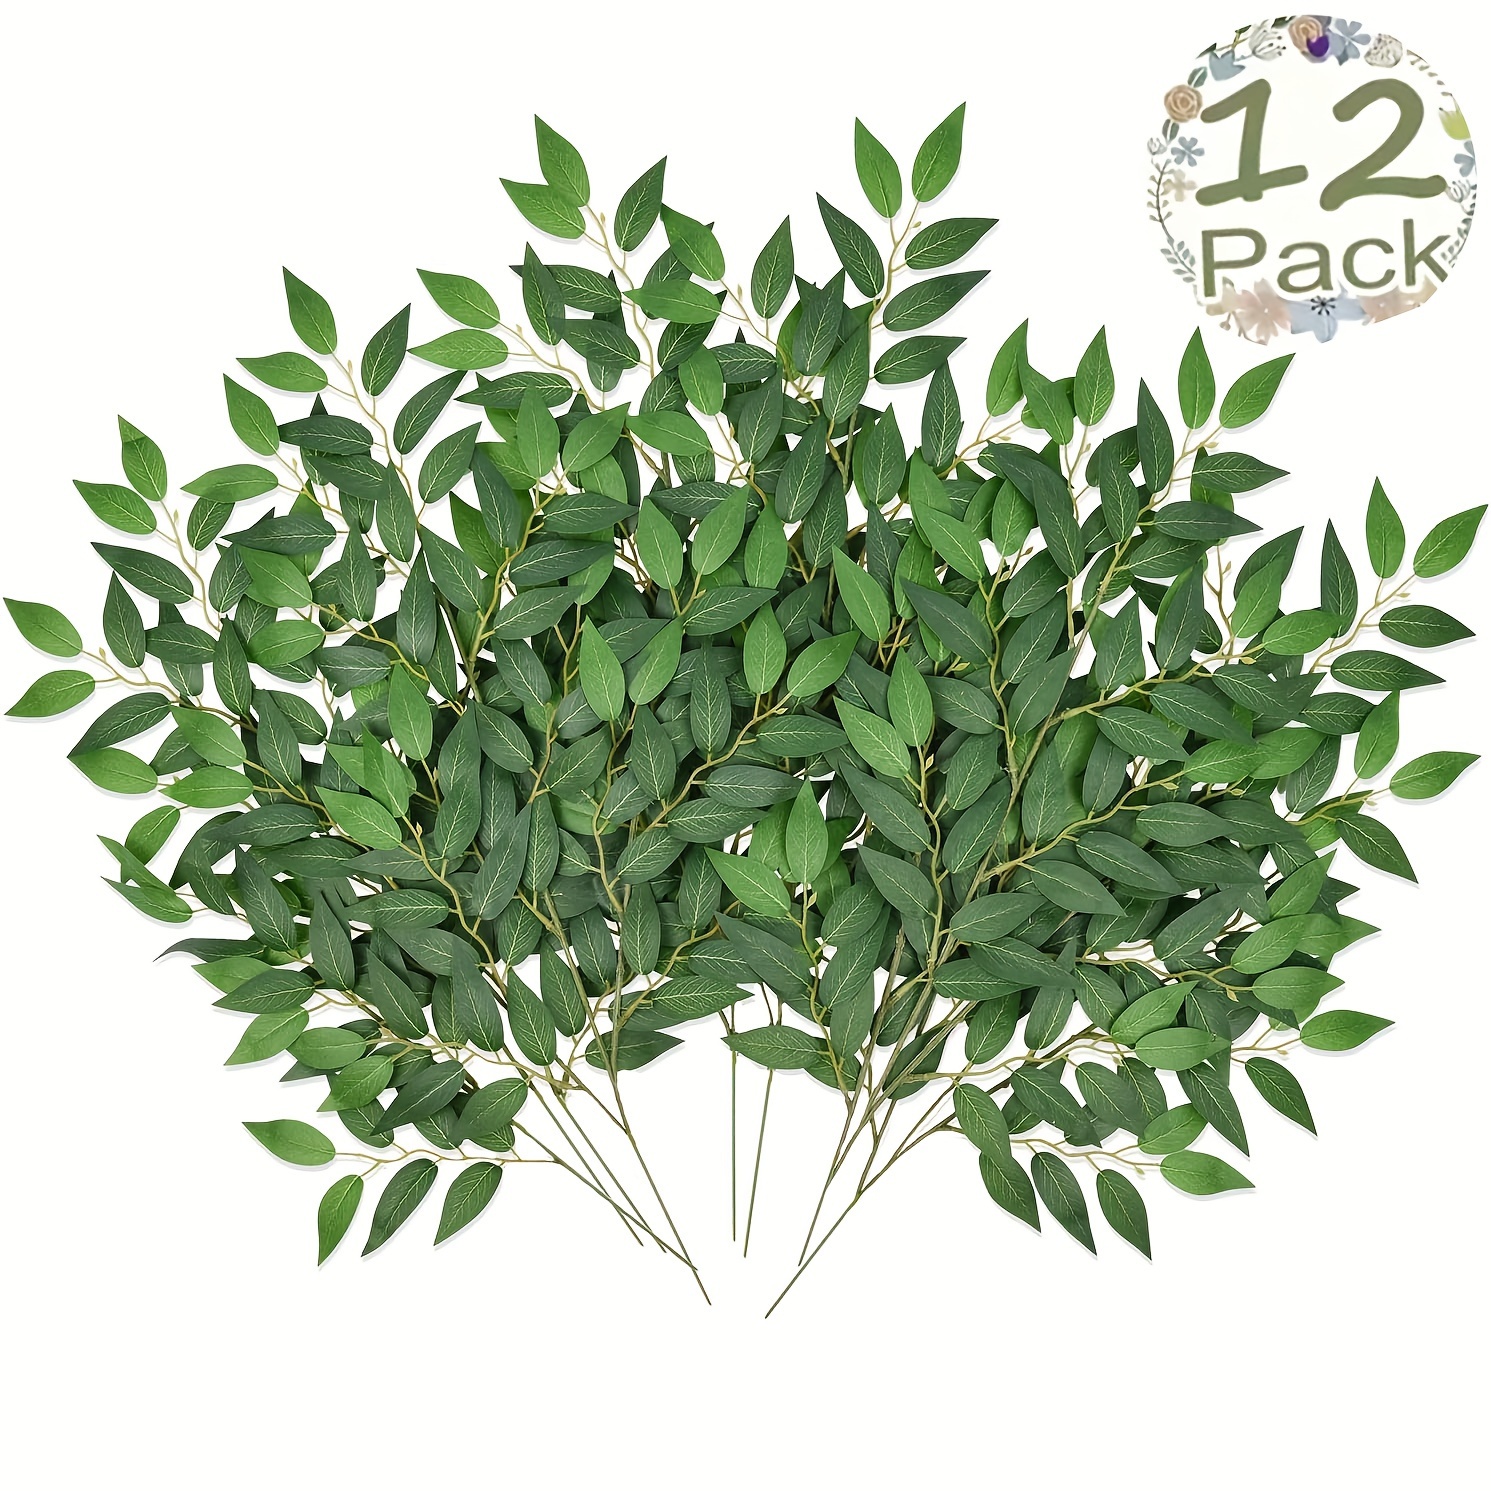 

12 Pack Faux Italian Ruscus Greenery Stems, Artificial Outdoor Green Leaf Bouquet For Vase Bridal Wedding Arch Table Home Centerpiece Decor, Summer Decor